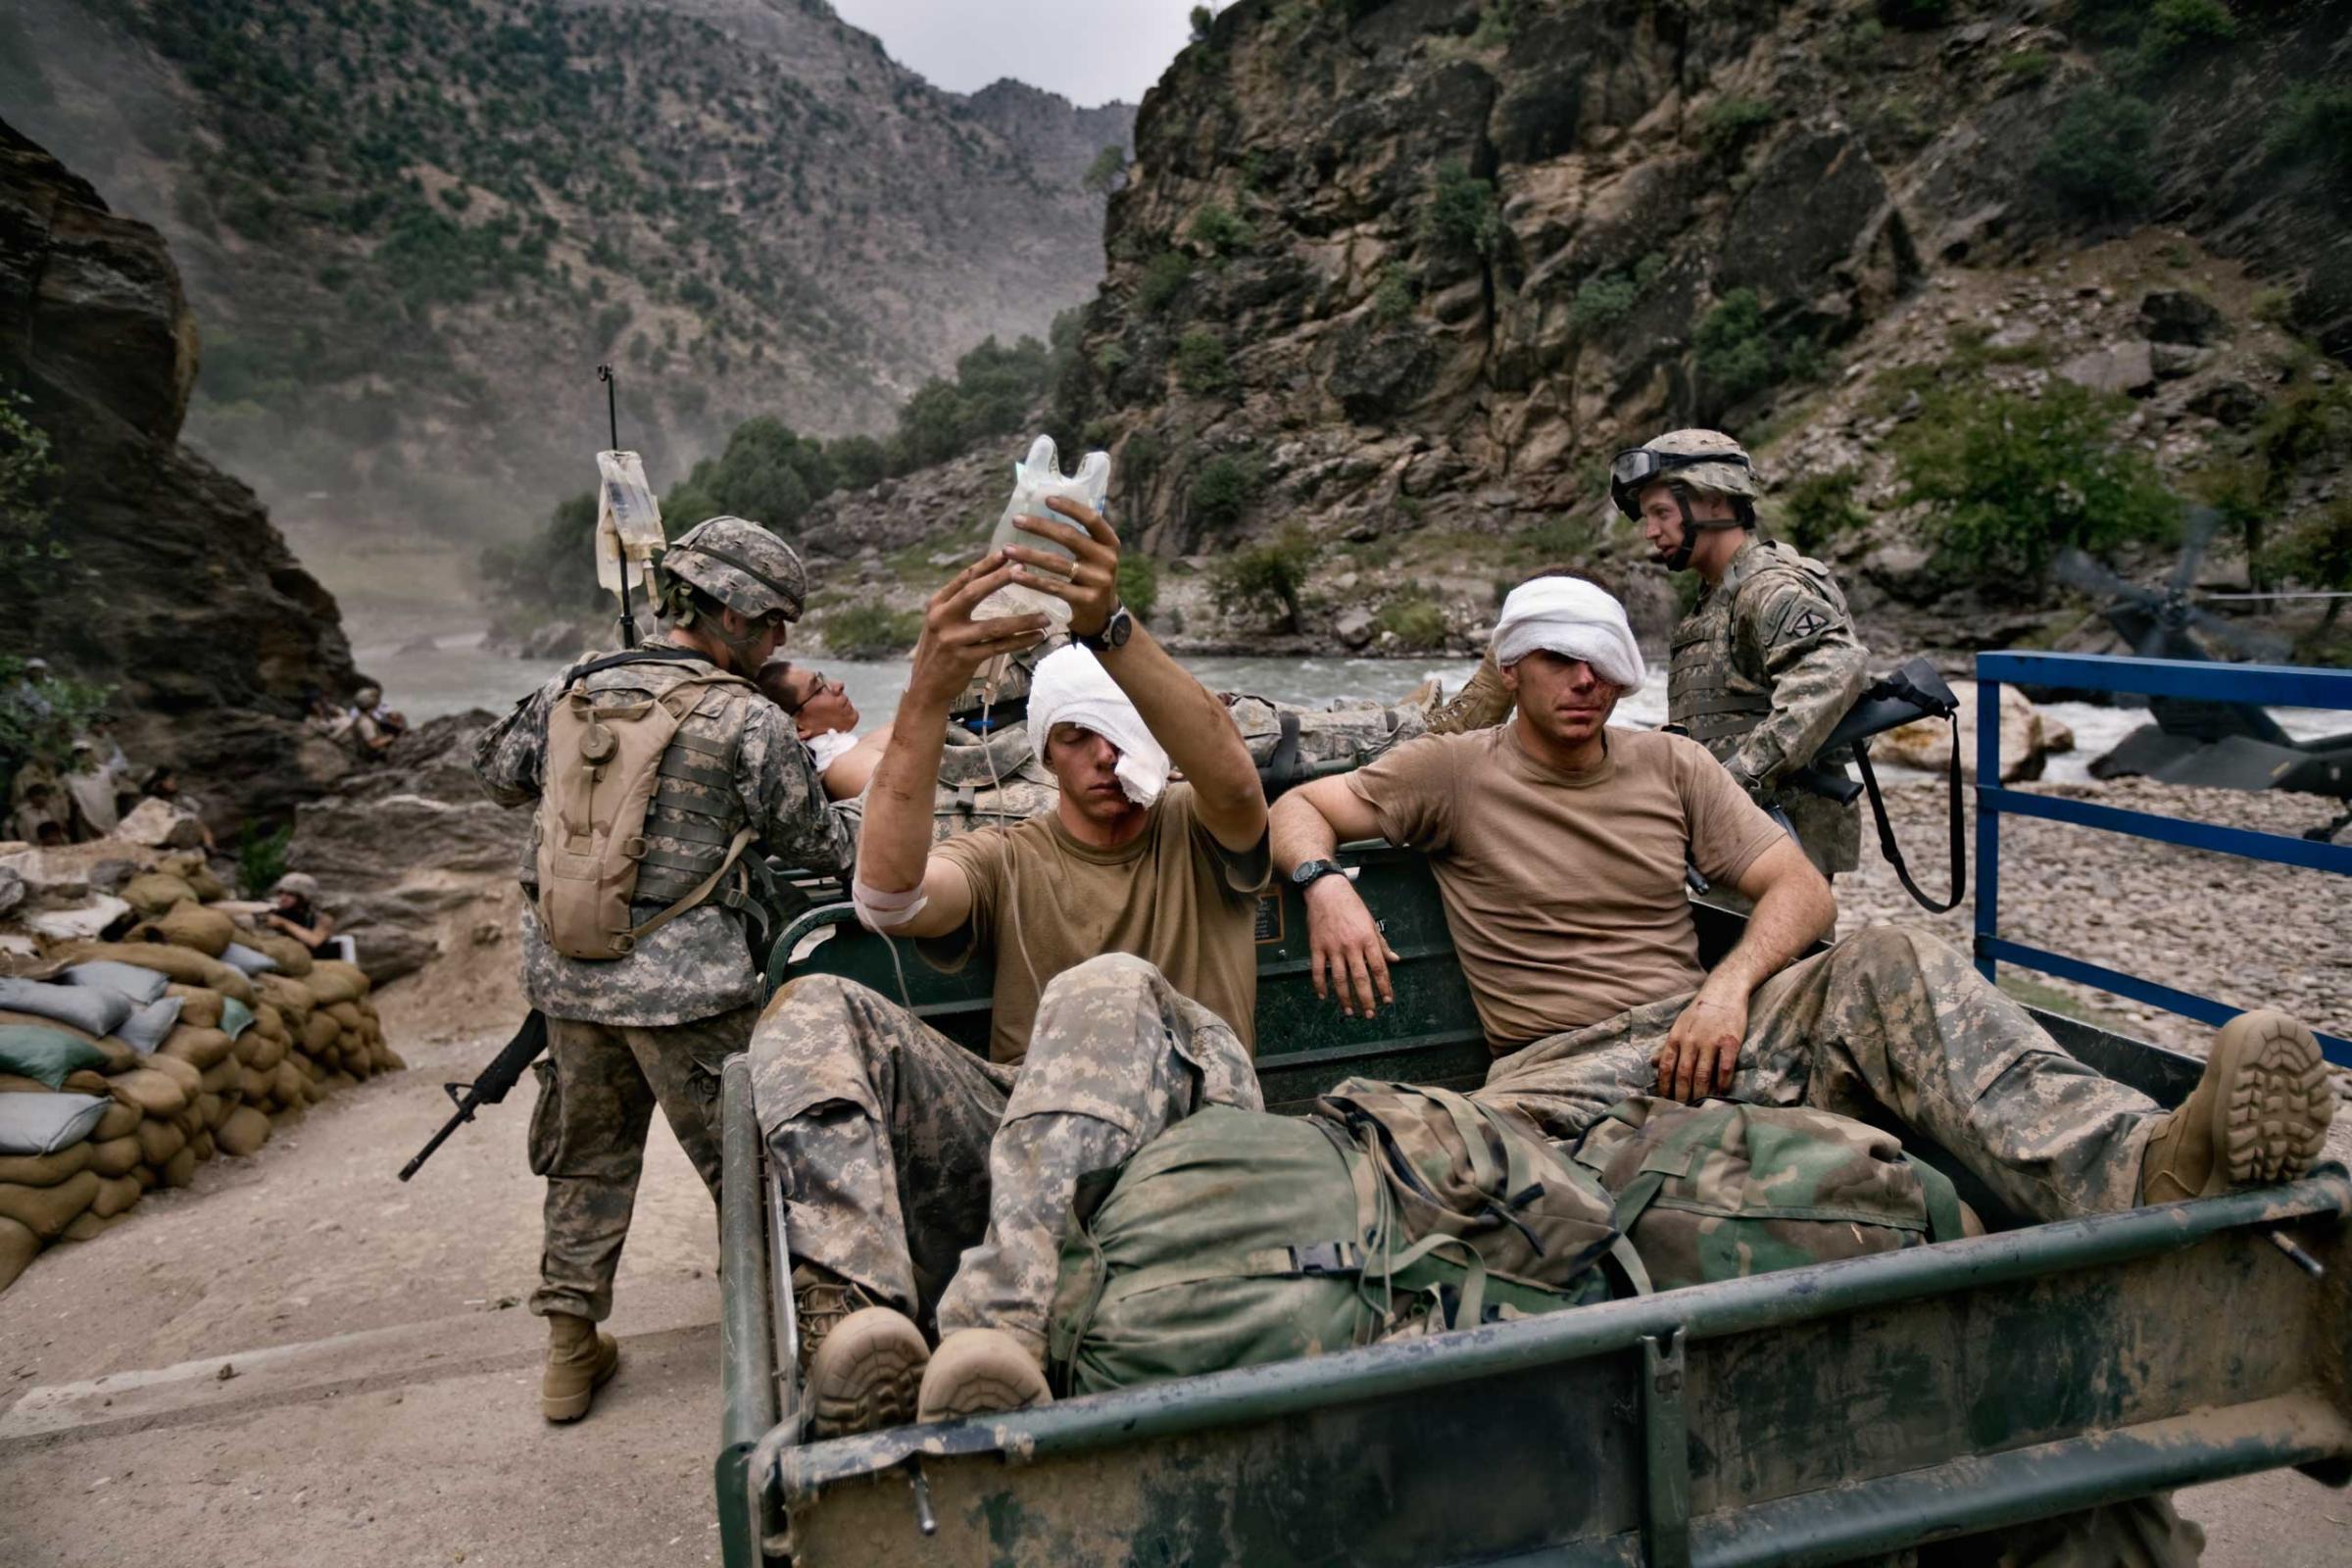 AUGUST 2006: Three wounded U.S. Army soldiers from the 10th Mountain Division await evacuation by helicopter from Kamdesh, Nuristan province. They were ambushed and suffered wounds to their eyes and foreheads.  (Photo by Robert Nickelsberg)